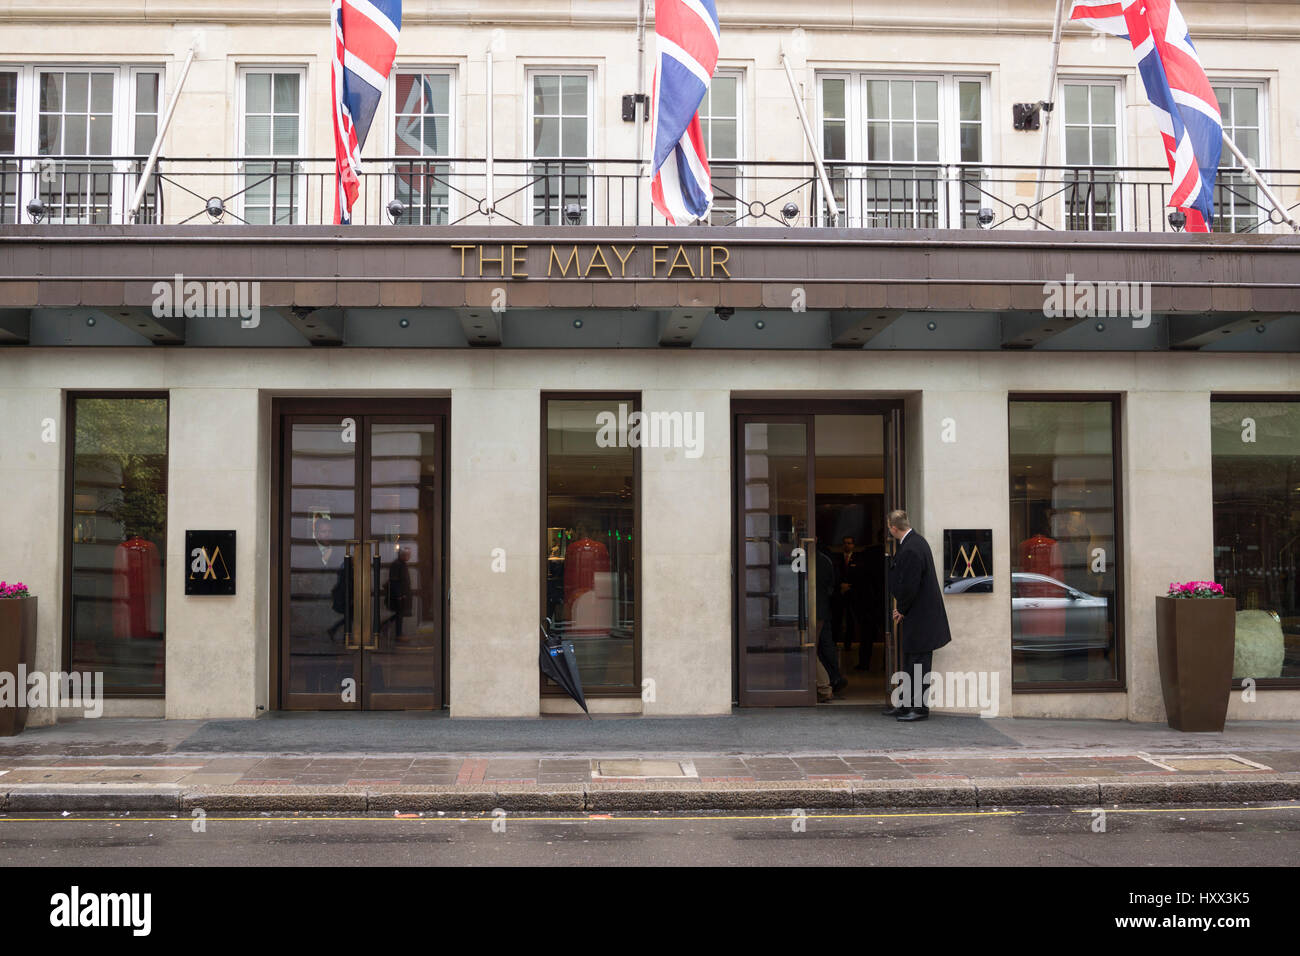 A doorman opens the door at the entrance to The May Fair Hotel on Stratton Street in London Stock Photo